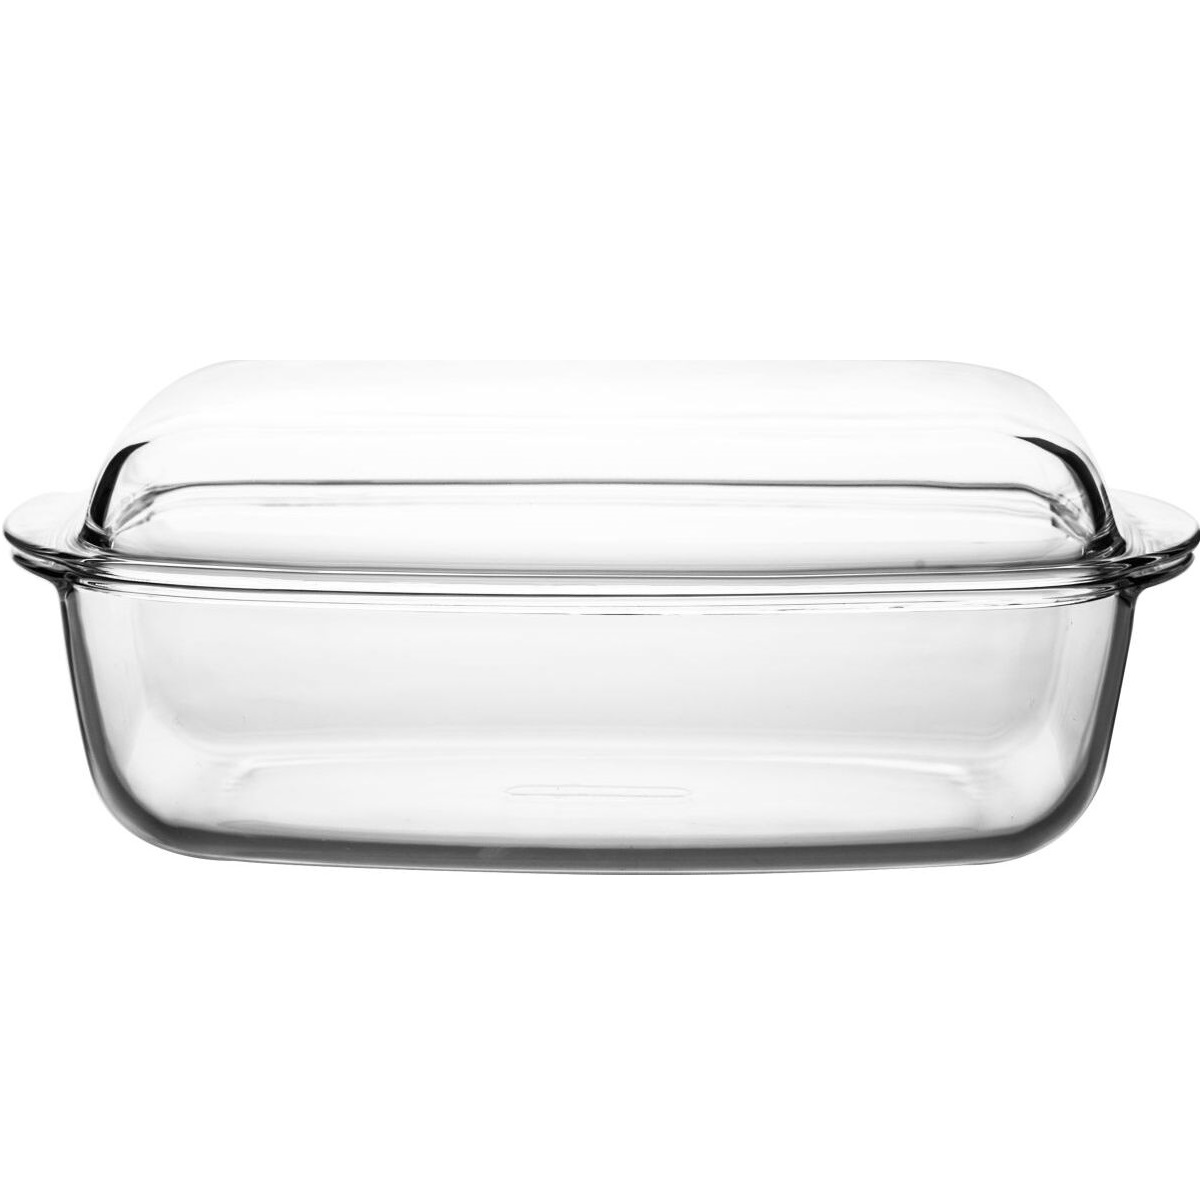 утятница pyrex o cuisine 4 5л Утятница Pyrex 6,5л, 466AA